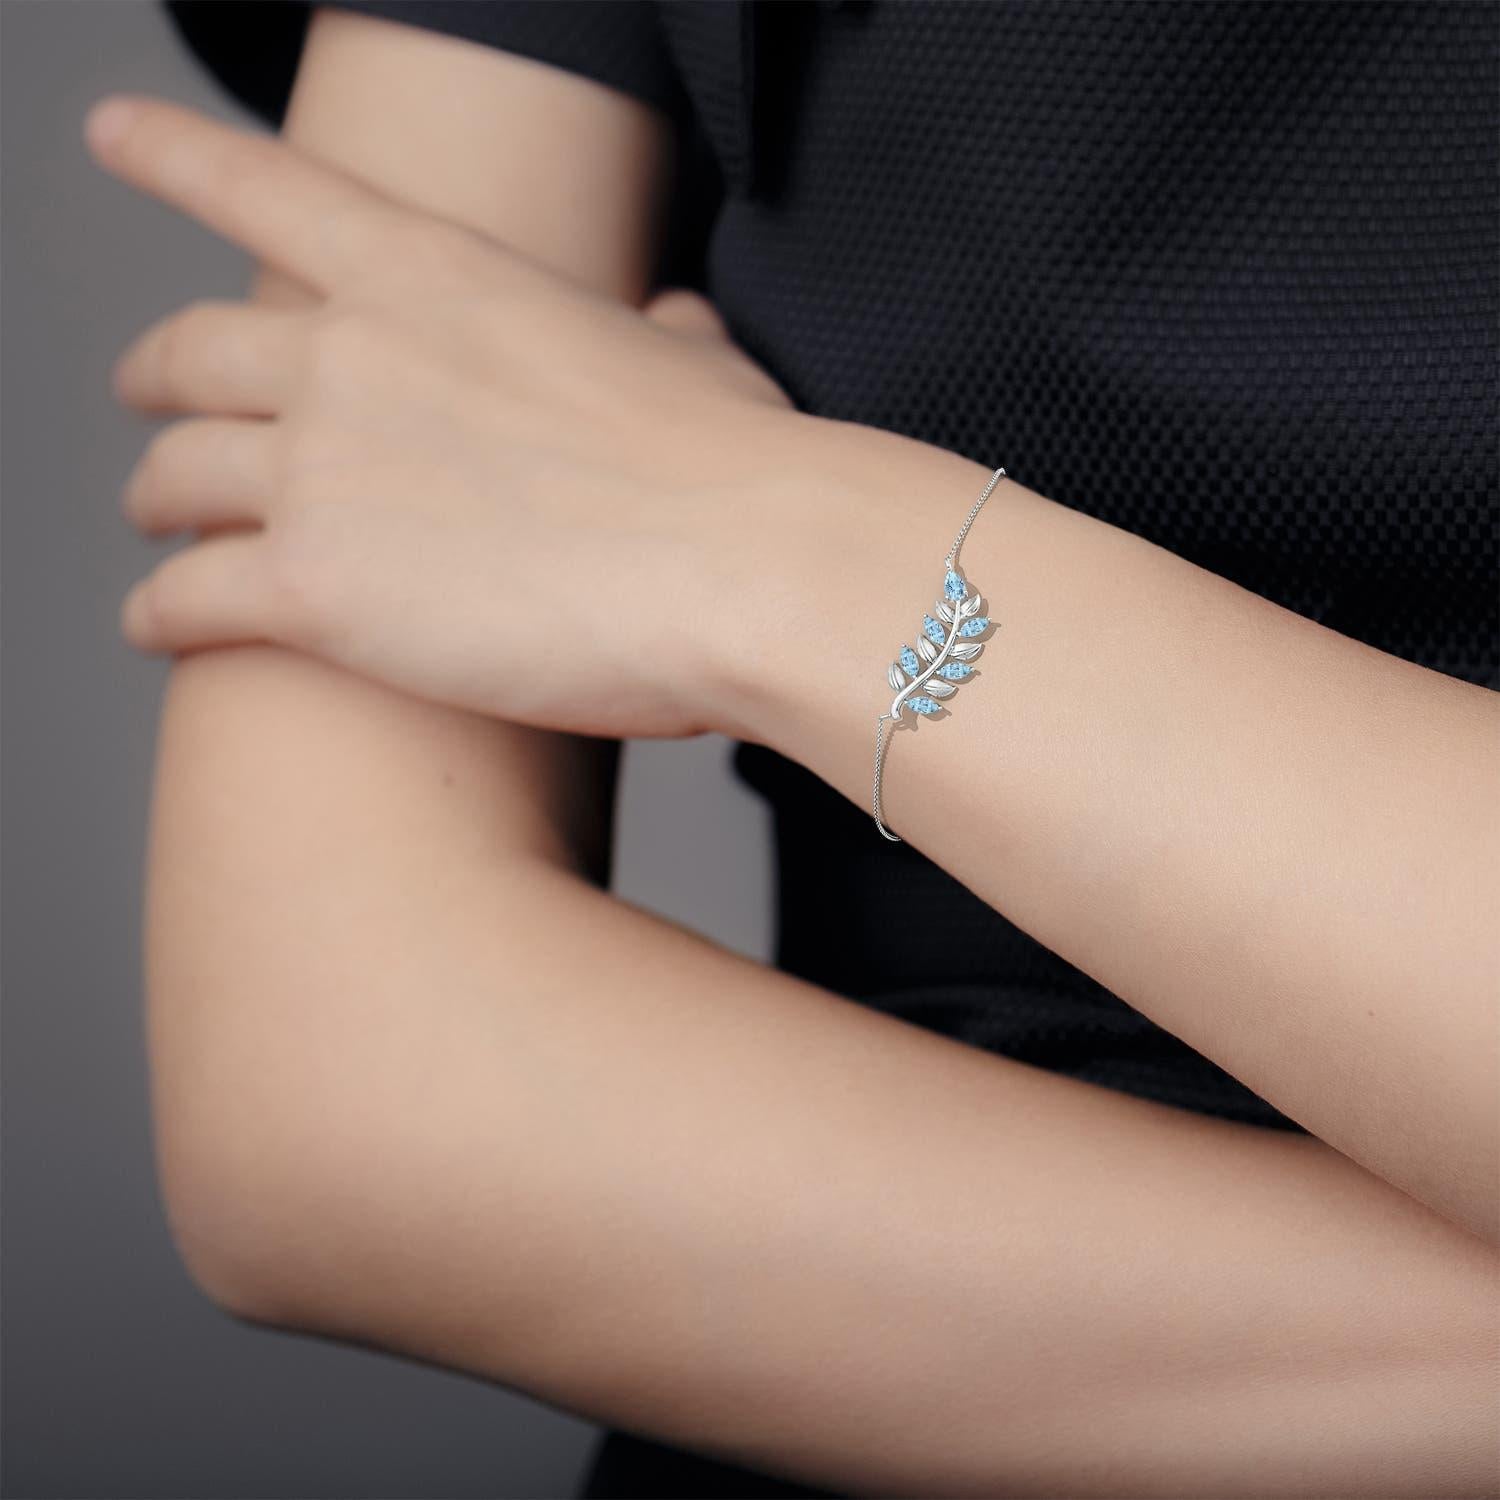 This olive branch bracelet is a stunning symbol of peace and victory. It showcases pear-shaped and marquise aquamarines that exude an icy blue hue. The leaf motifs enhance the overall allure of this 14k white gold bracelet.